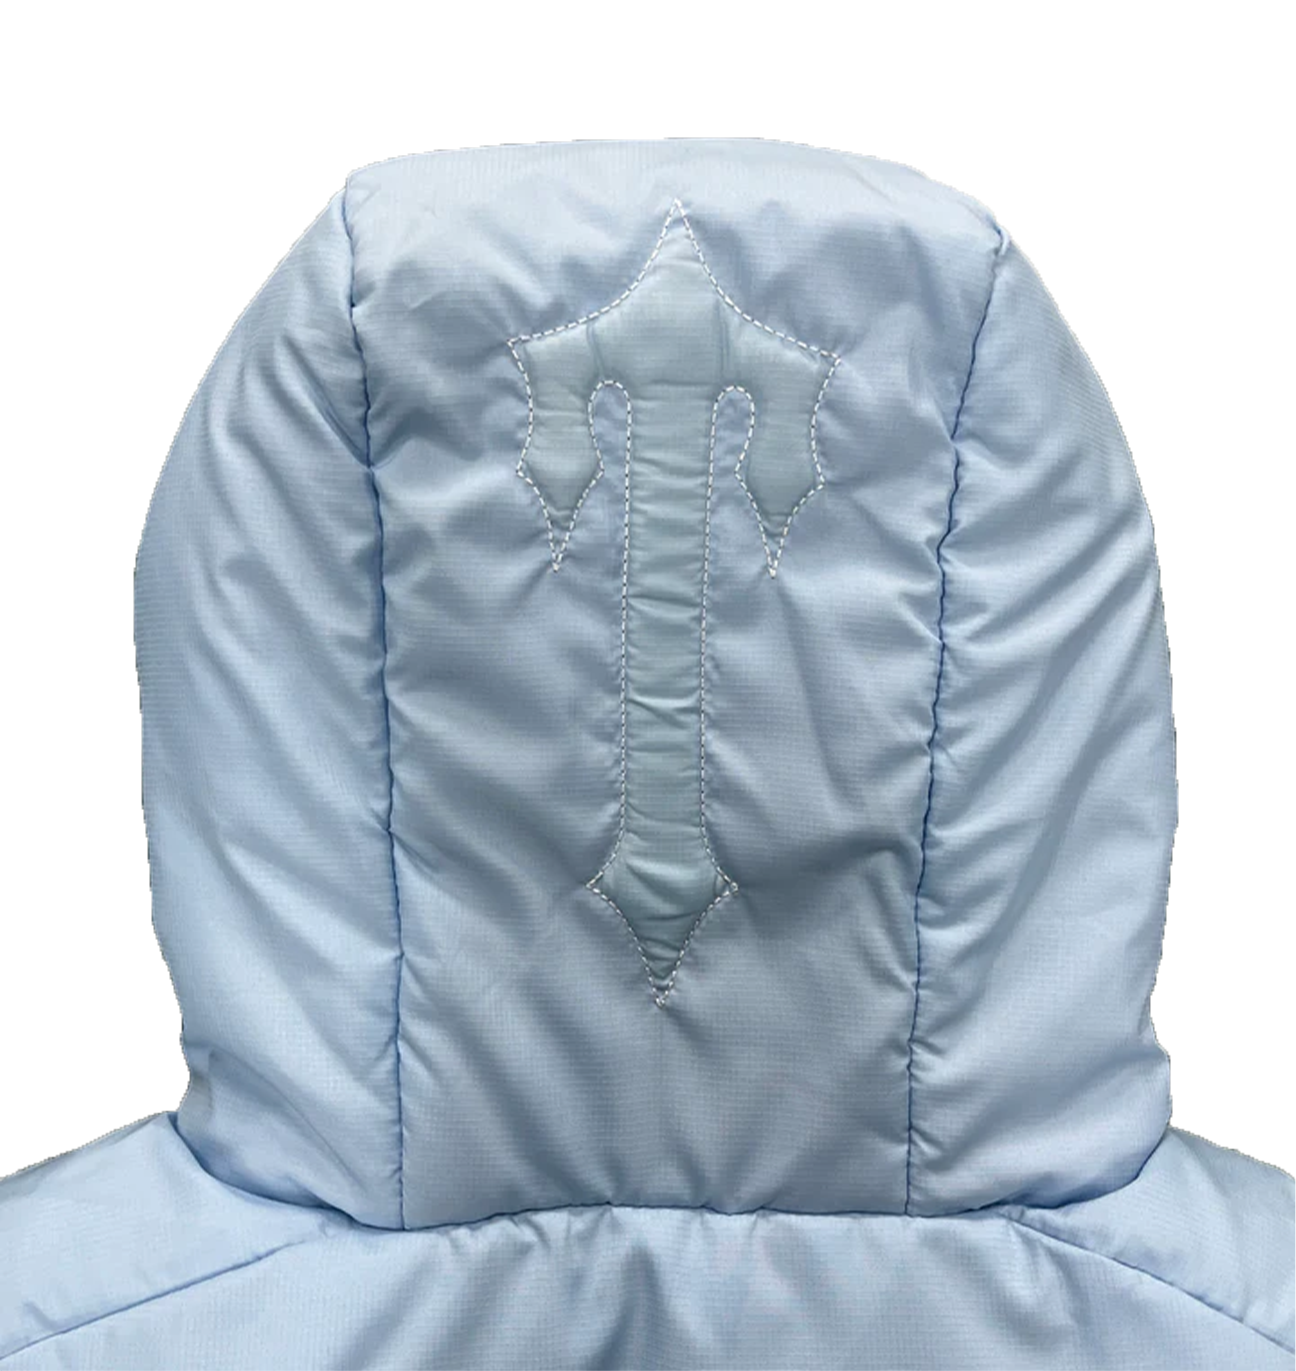 TRAPSTAR WOMEN'S DECODED 2.0 HOODED PUFFER-ICE BLUE